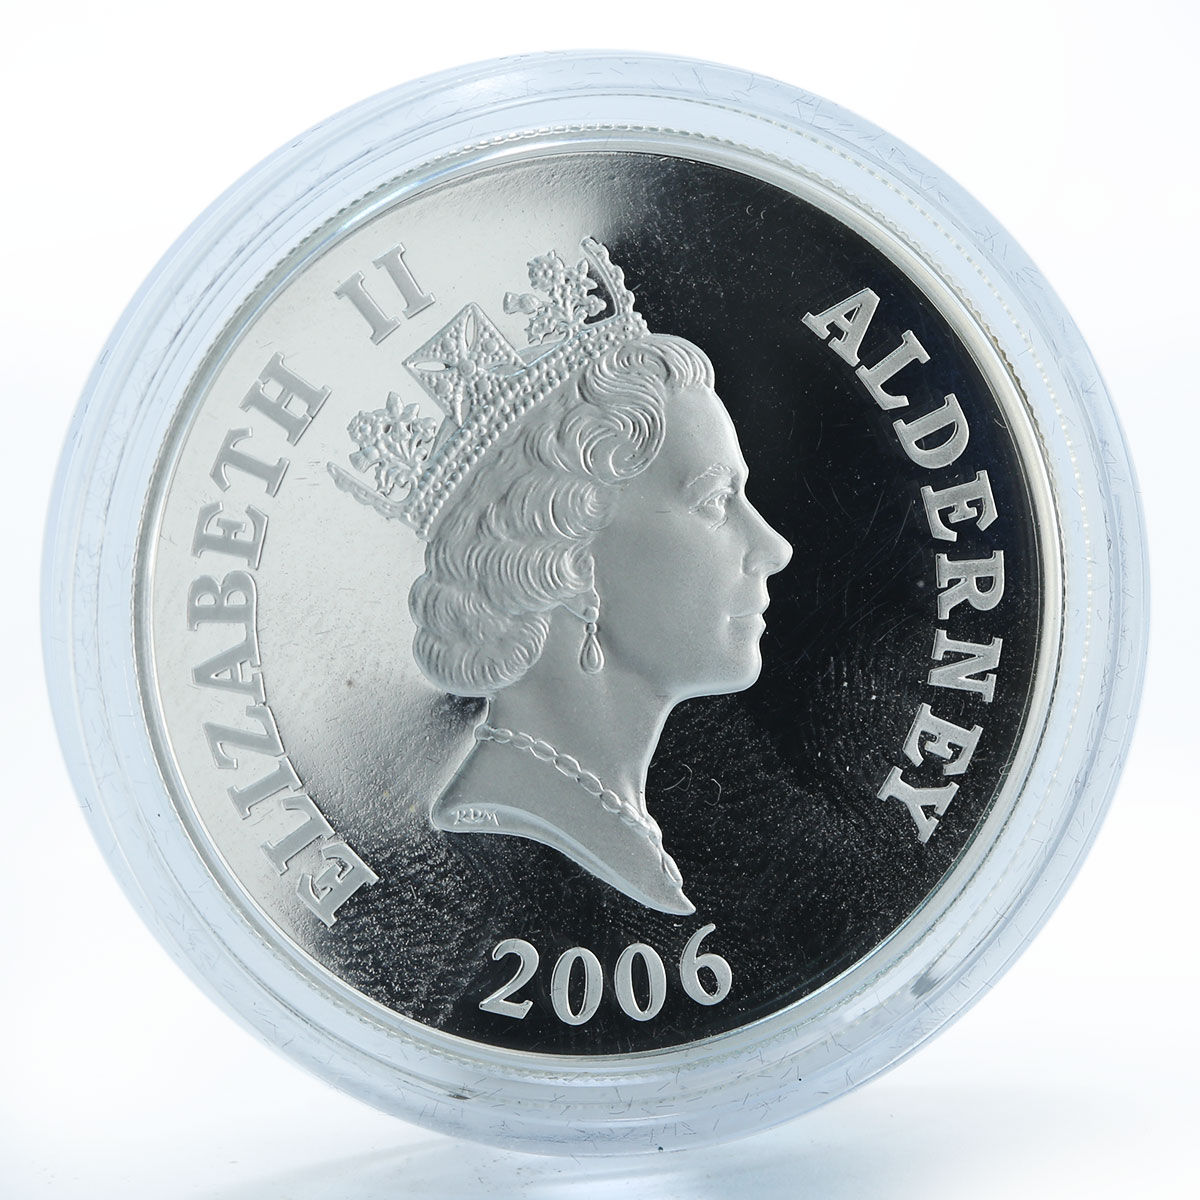 Alderney 5 Pounds Charles Dickens Literature proof silver coin 2006